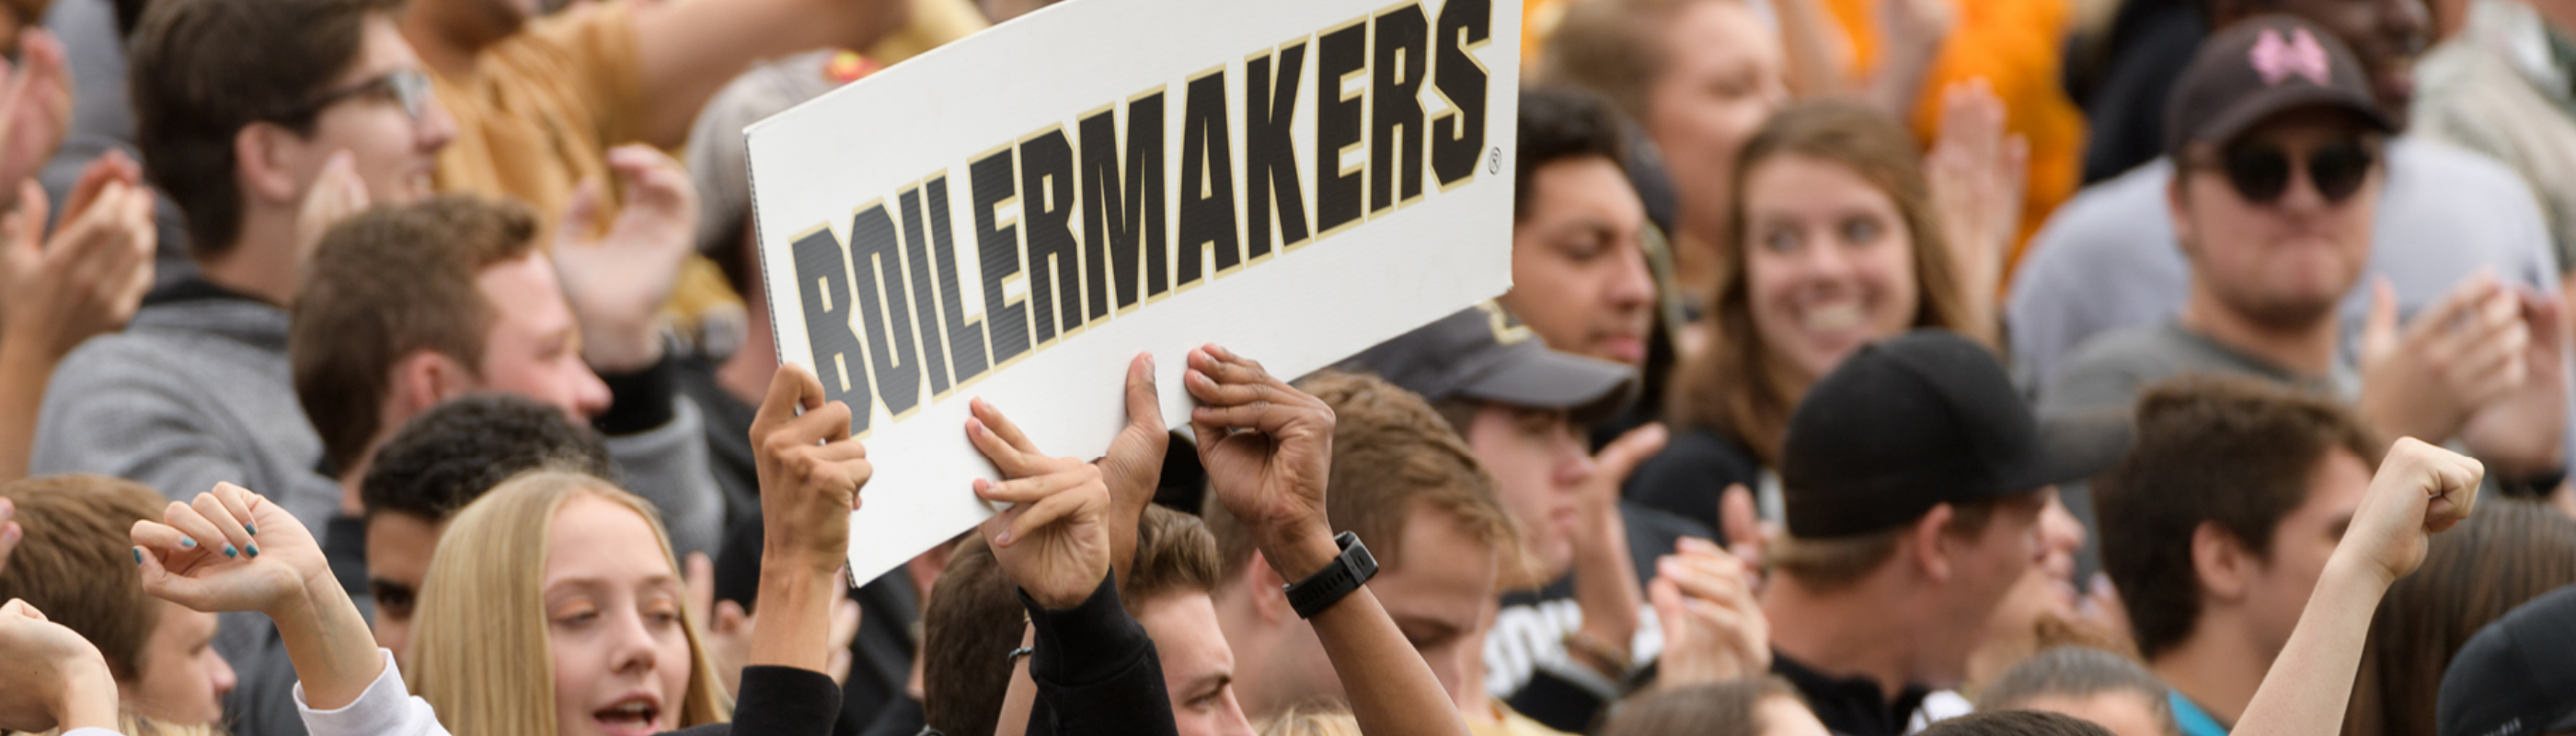 Students Holding a boilermakers sign